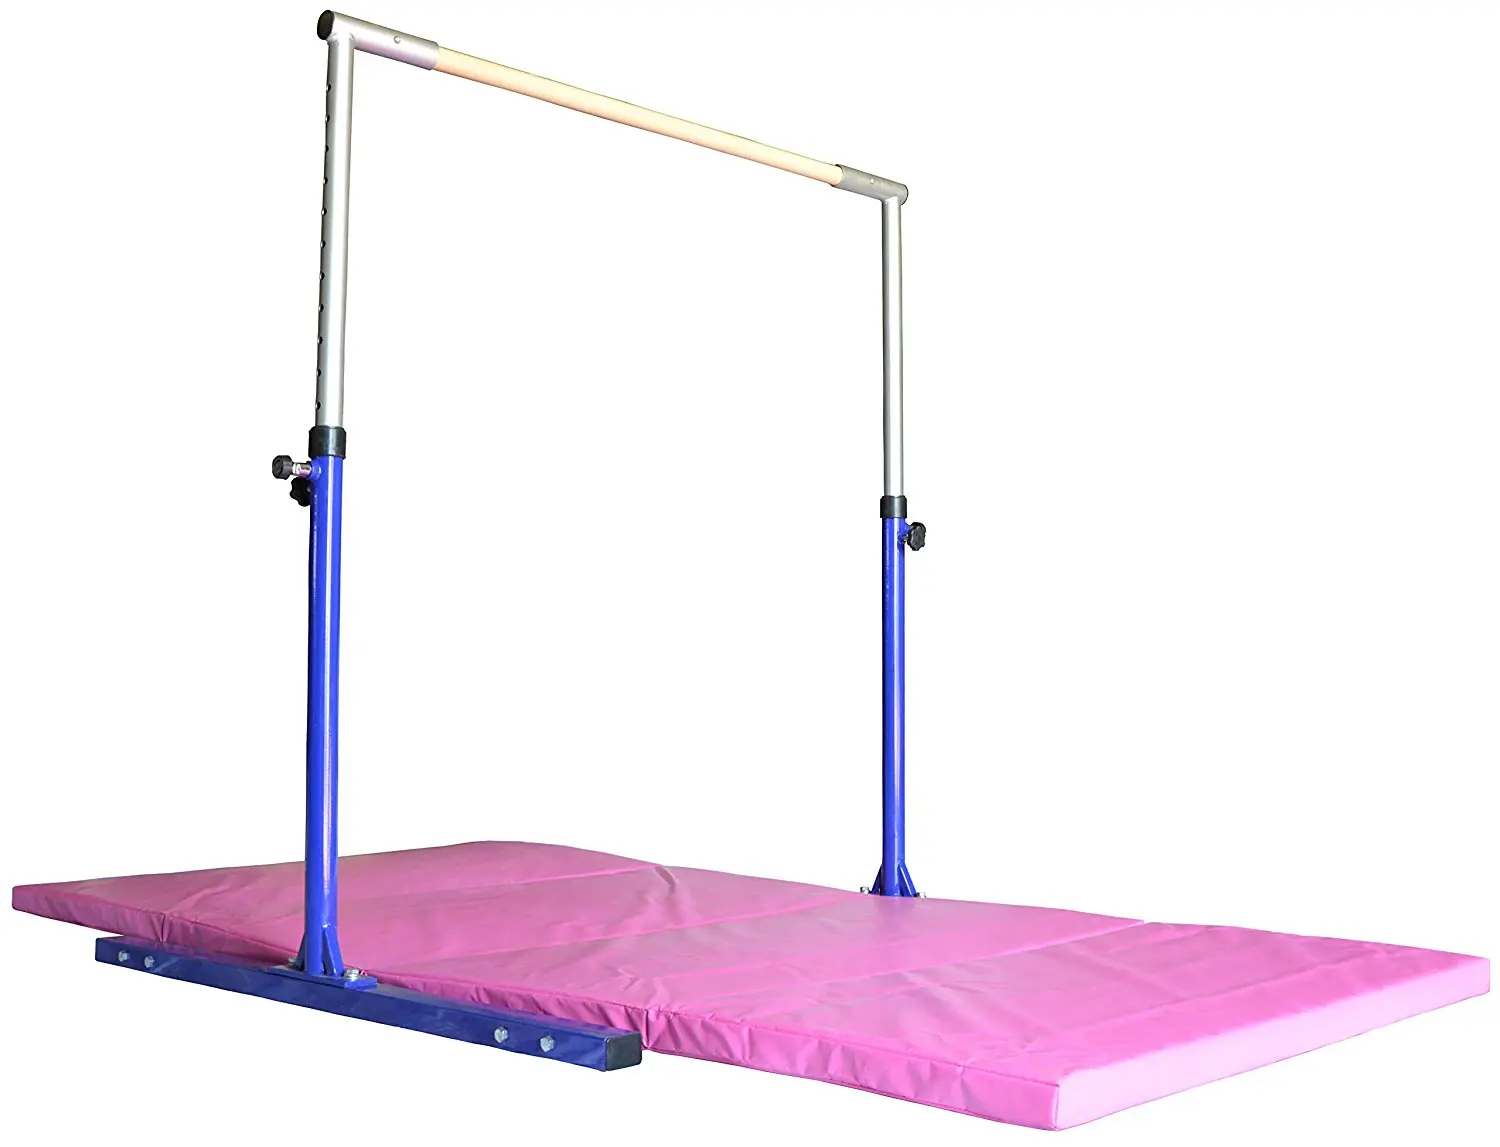 TRIP WING Gymnastic Kip Bar,Horizontal Bar for Kids Girls Junior,3' to 5' Adjustable Height,Home Gym Equipment,Ideal for Indoor and Home Training,1-4 Levels,300lbs Weight Capacity 